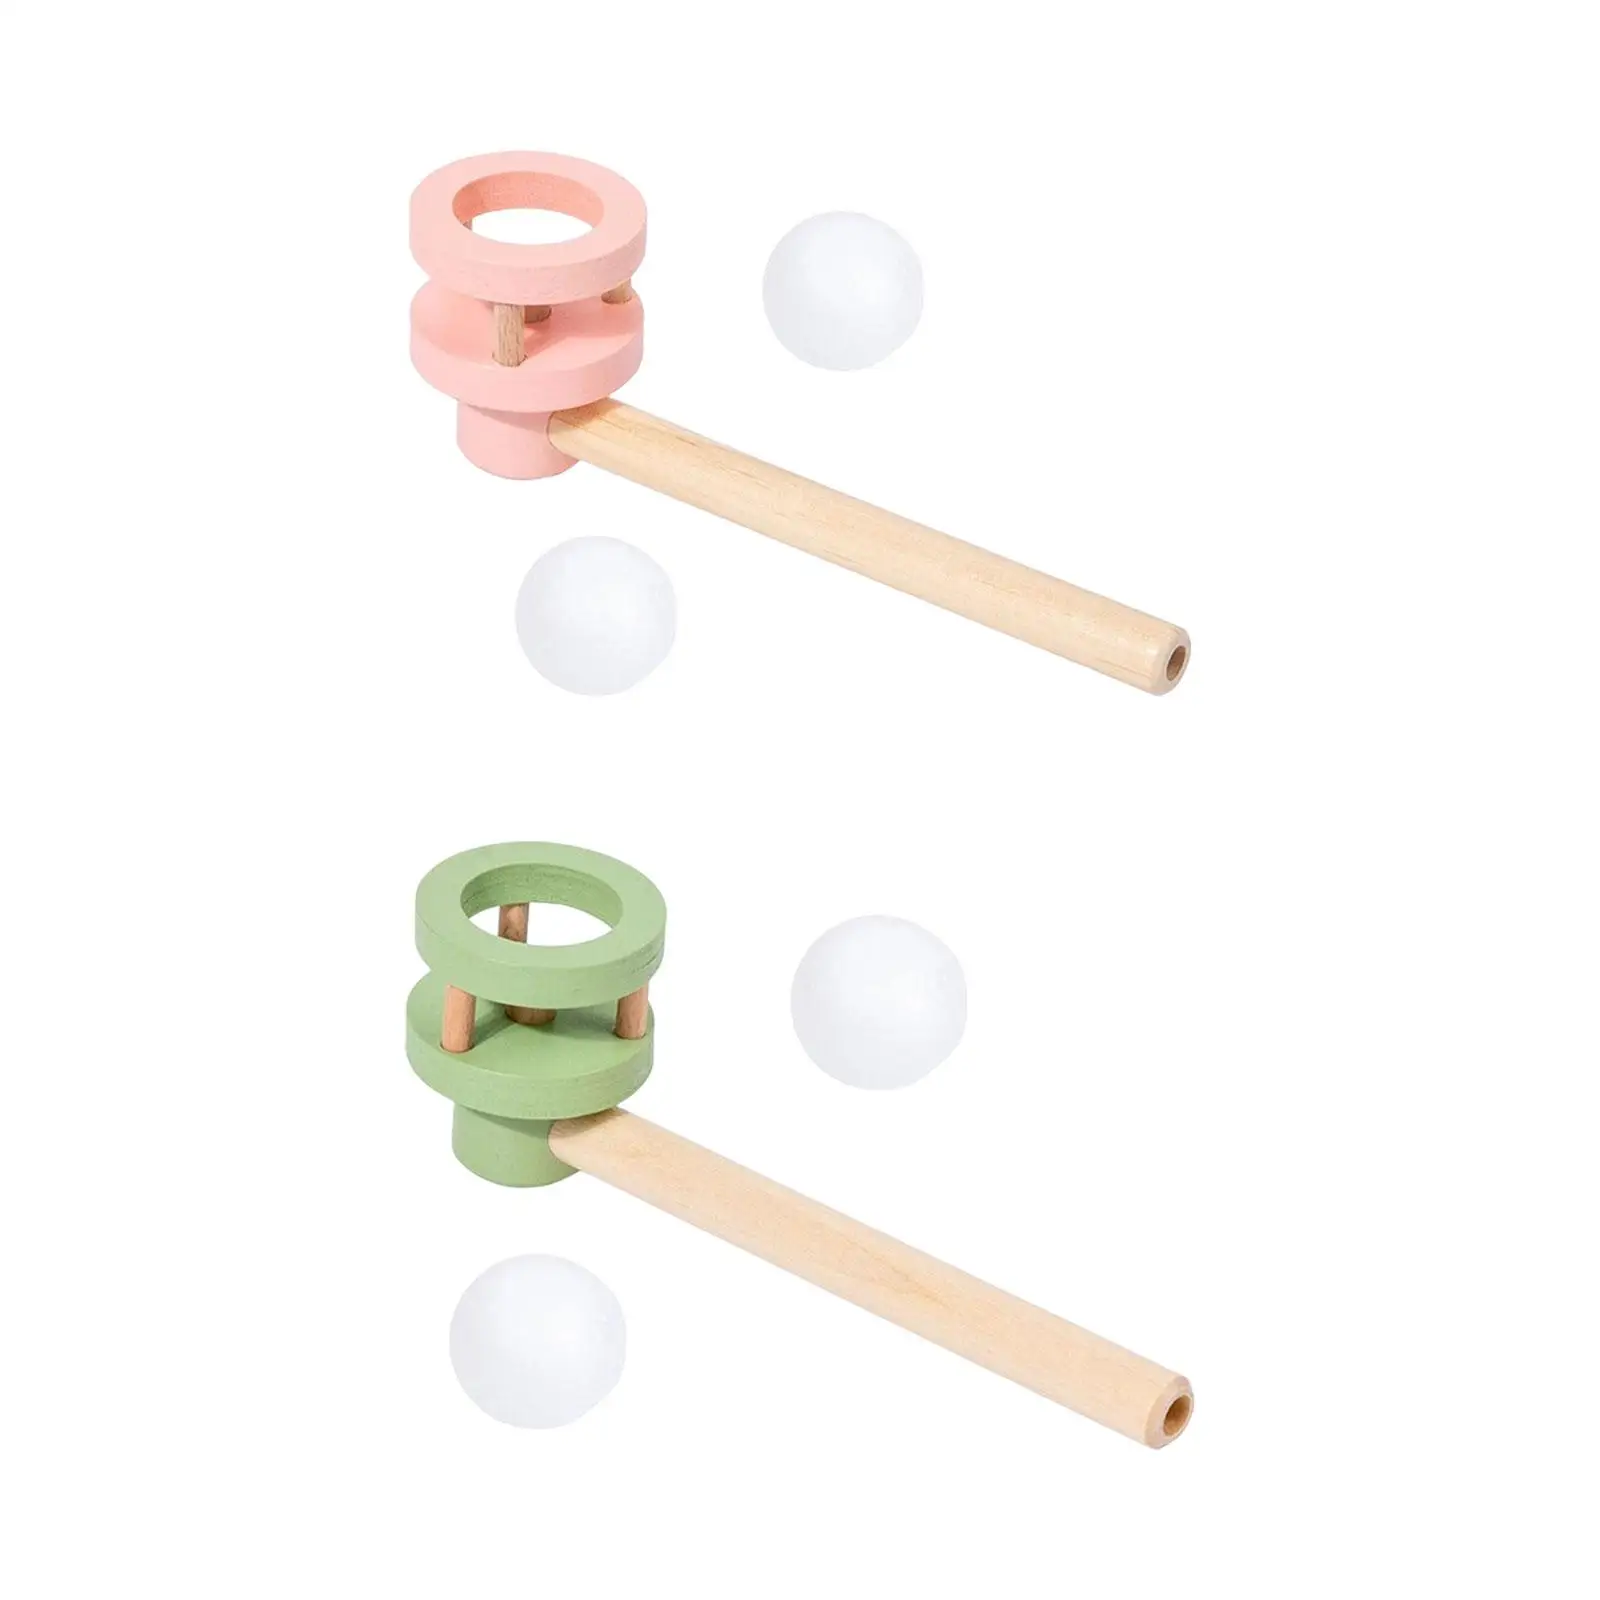 

Wooden Blowing Toys Montessori Target Game Classic Floating Blow Pipe Balls Game Toy for Goodie Bag Stuffers Children Boys Girls